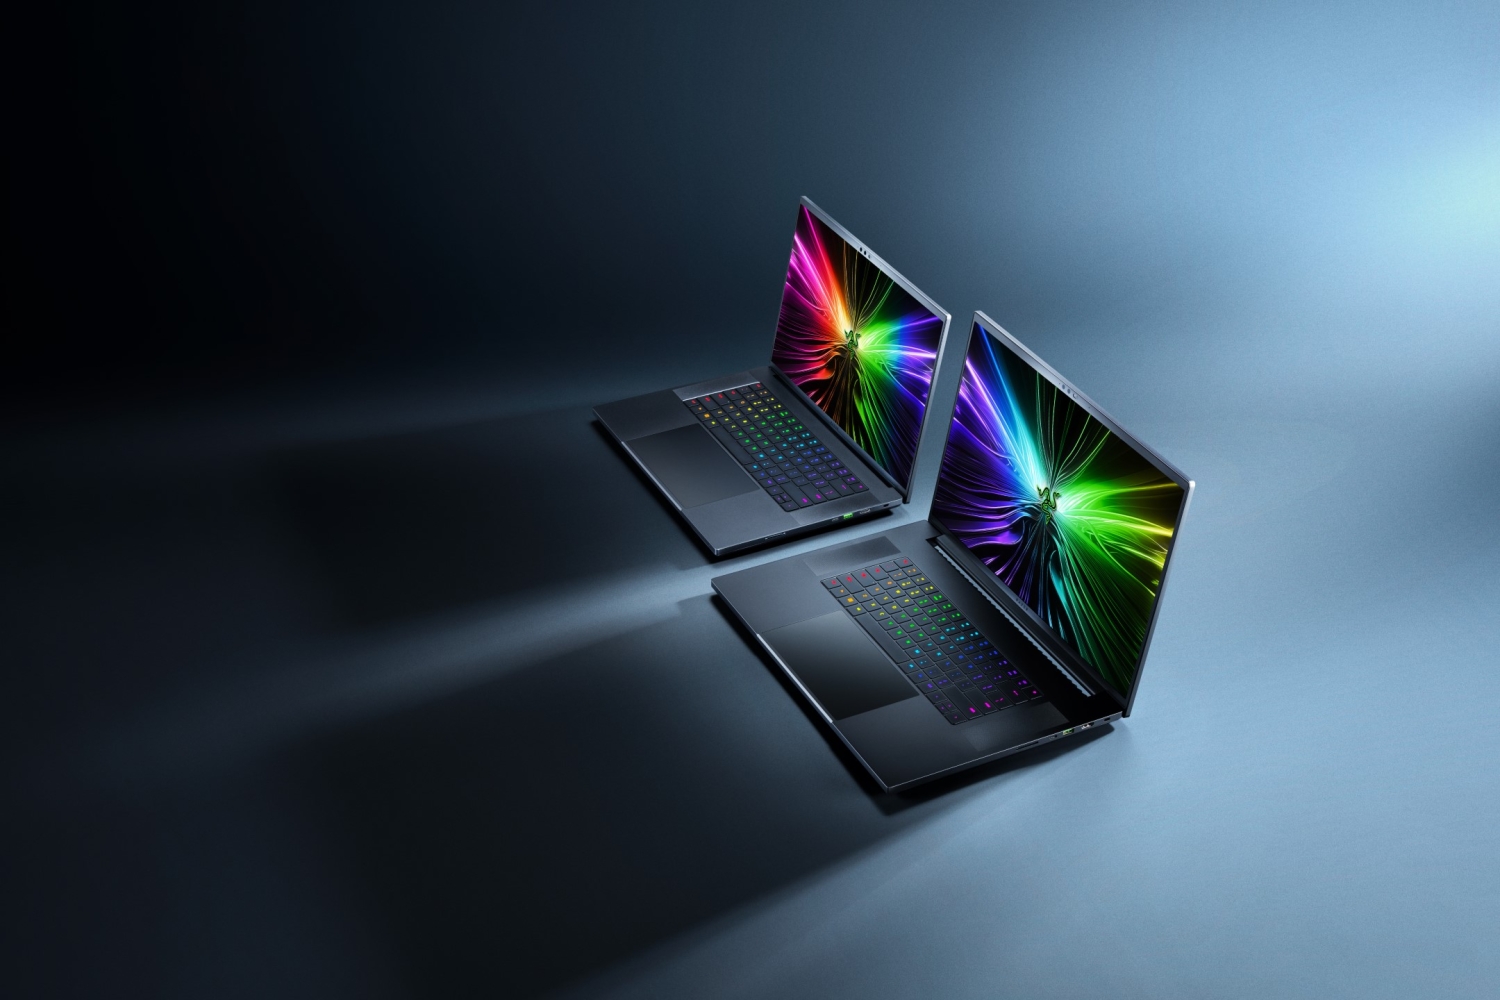 Razer Blade 14 review: Razer's first AMD gaming laptop is insanely